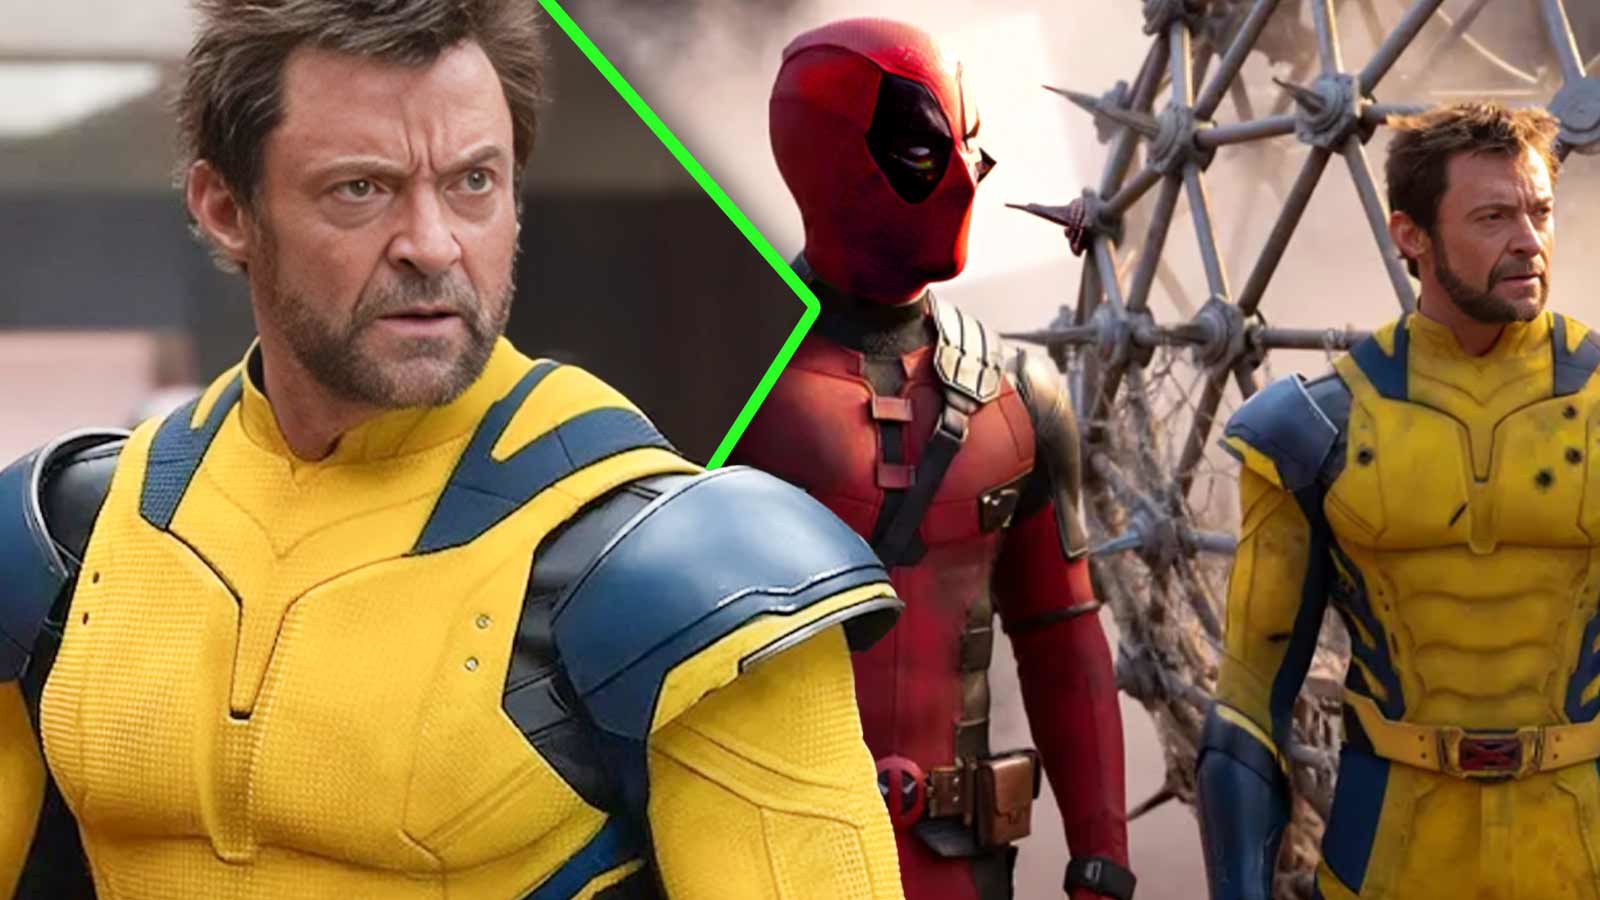 “What they gave Wolverine is so incredible”: Hugh Jackman Reveals How Deadpool & Wolverine Challenged Him, Promises Fans Will See a New Side of His Superhero